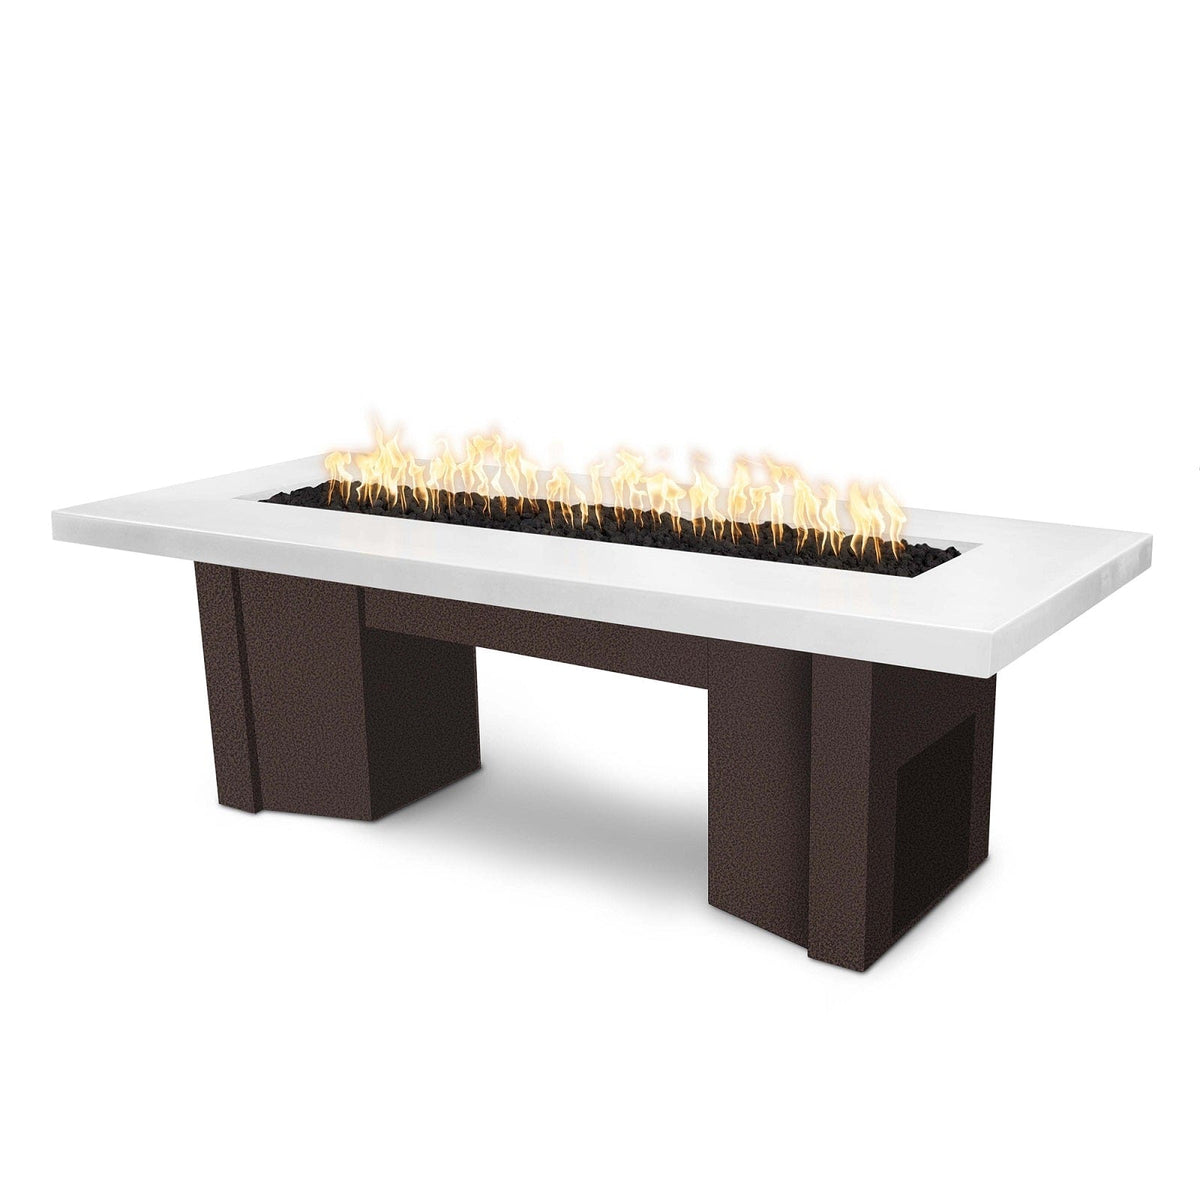 The Outdoor Plus Fire Features Limestone (-LIM) / Copper Vein Powder Coated Steel (-CPV) The Outdoor Plus 60&quot; Alameda Fire Table Smooth Concrete in Natural Gas - 110V Plug &amp; Play Electronic Ignition / OPT-ALMGFRC60EKIT-NG